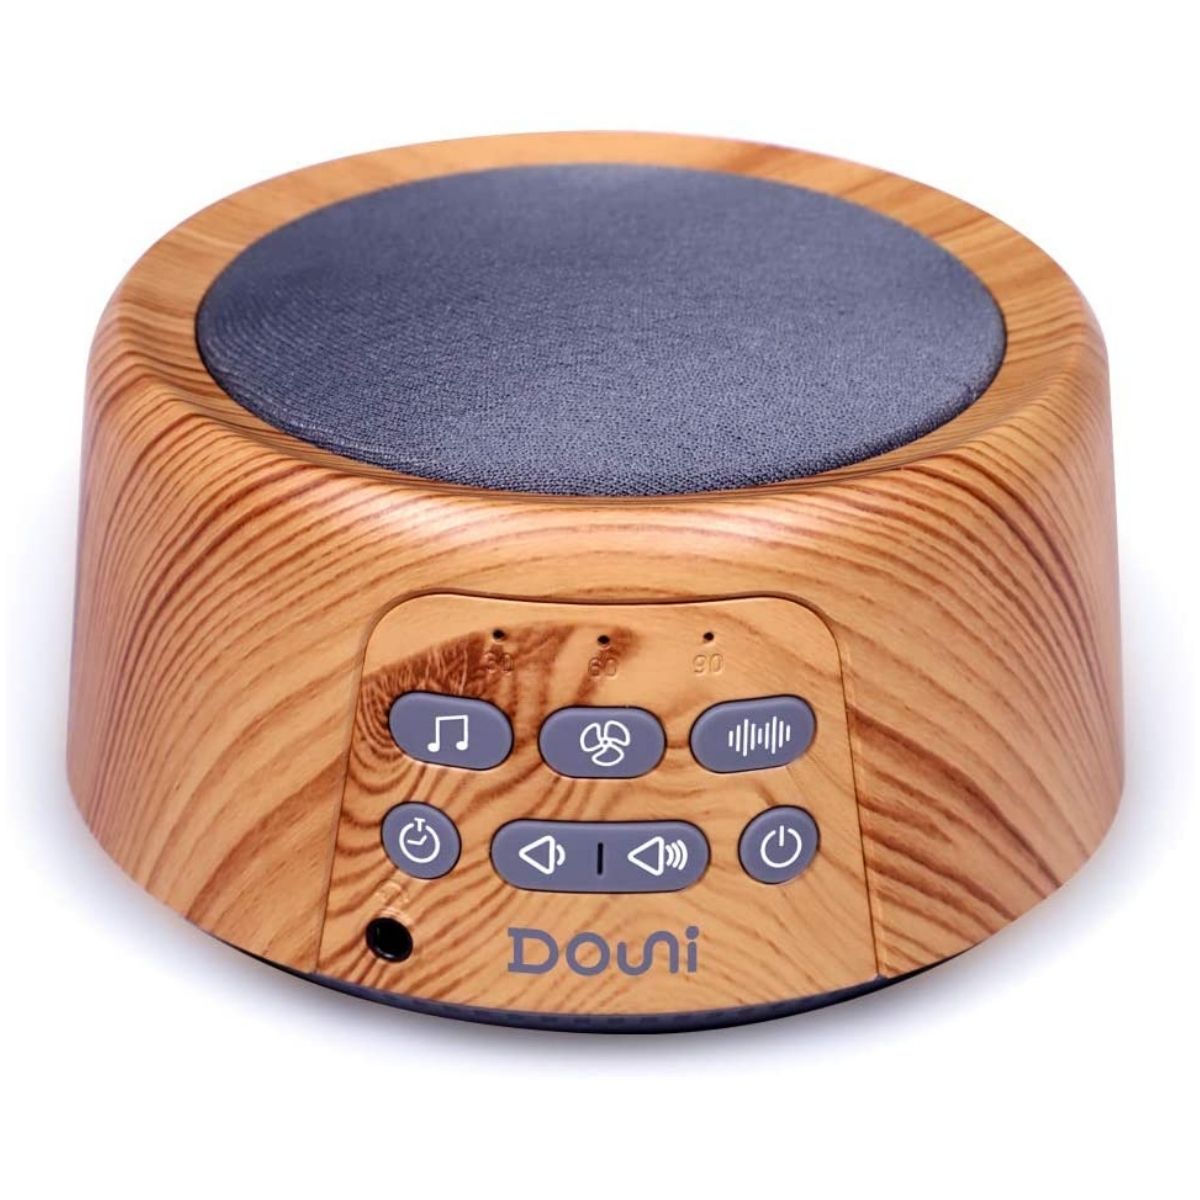 The Best Home Office Gifts Option: Douni Sound Machine - White Noise Machine